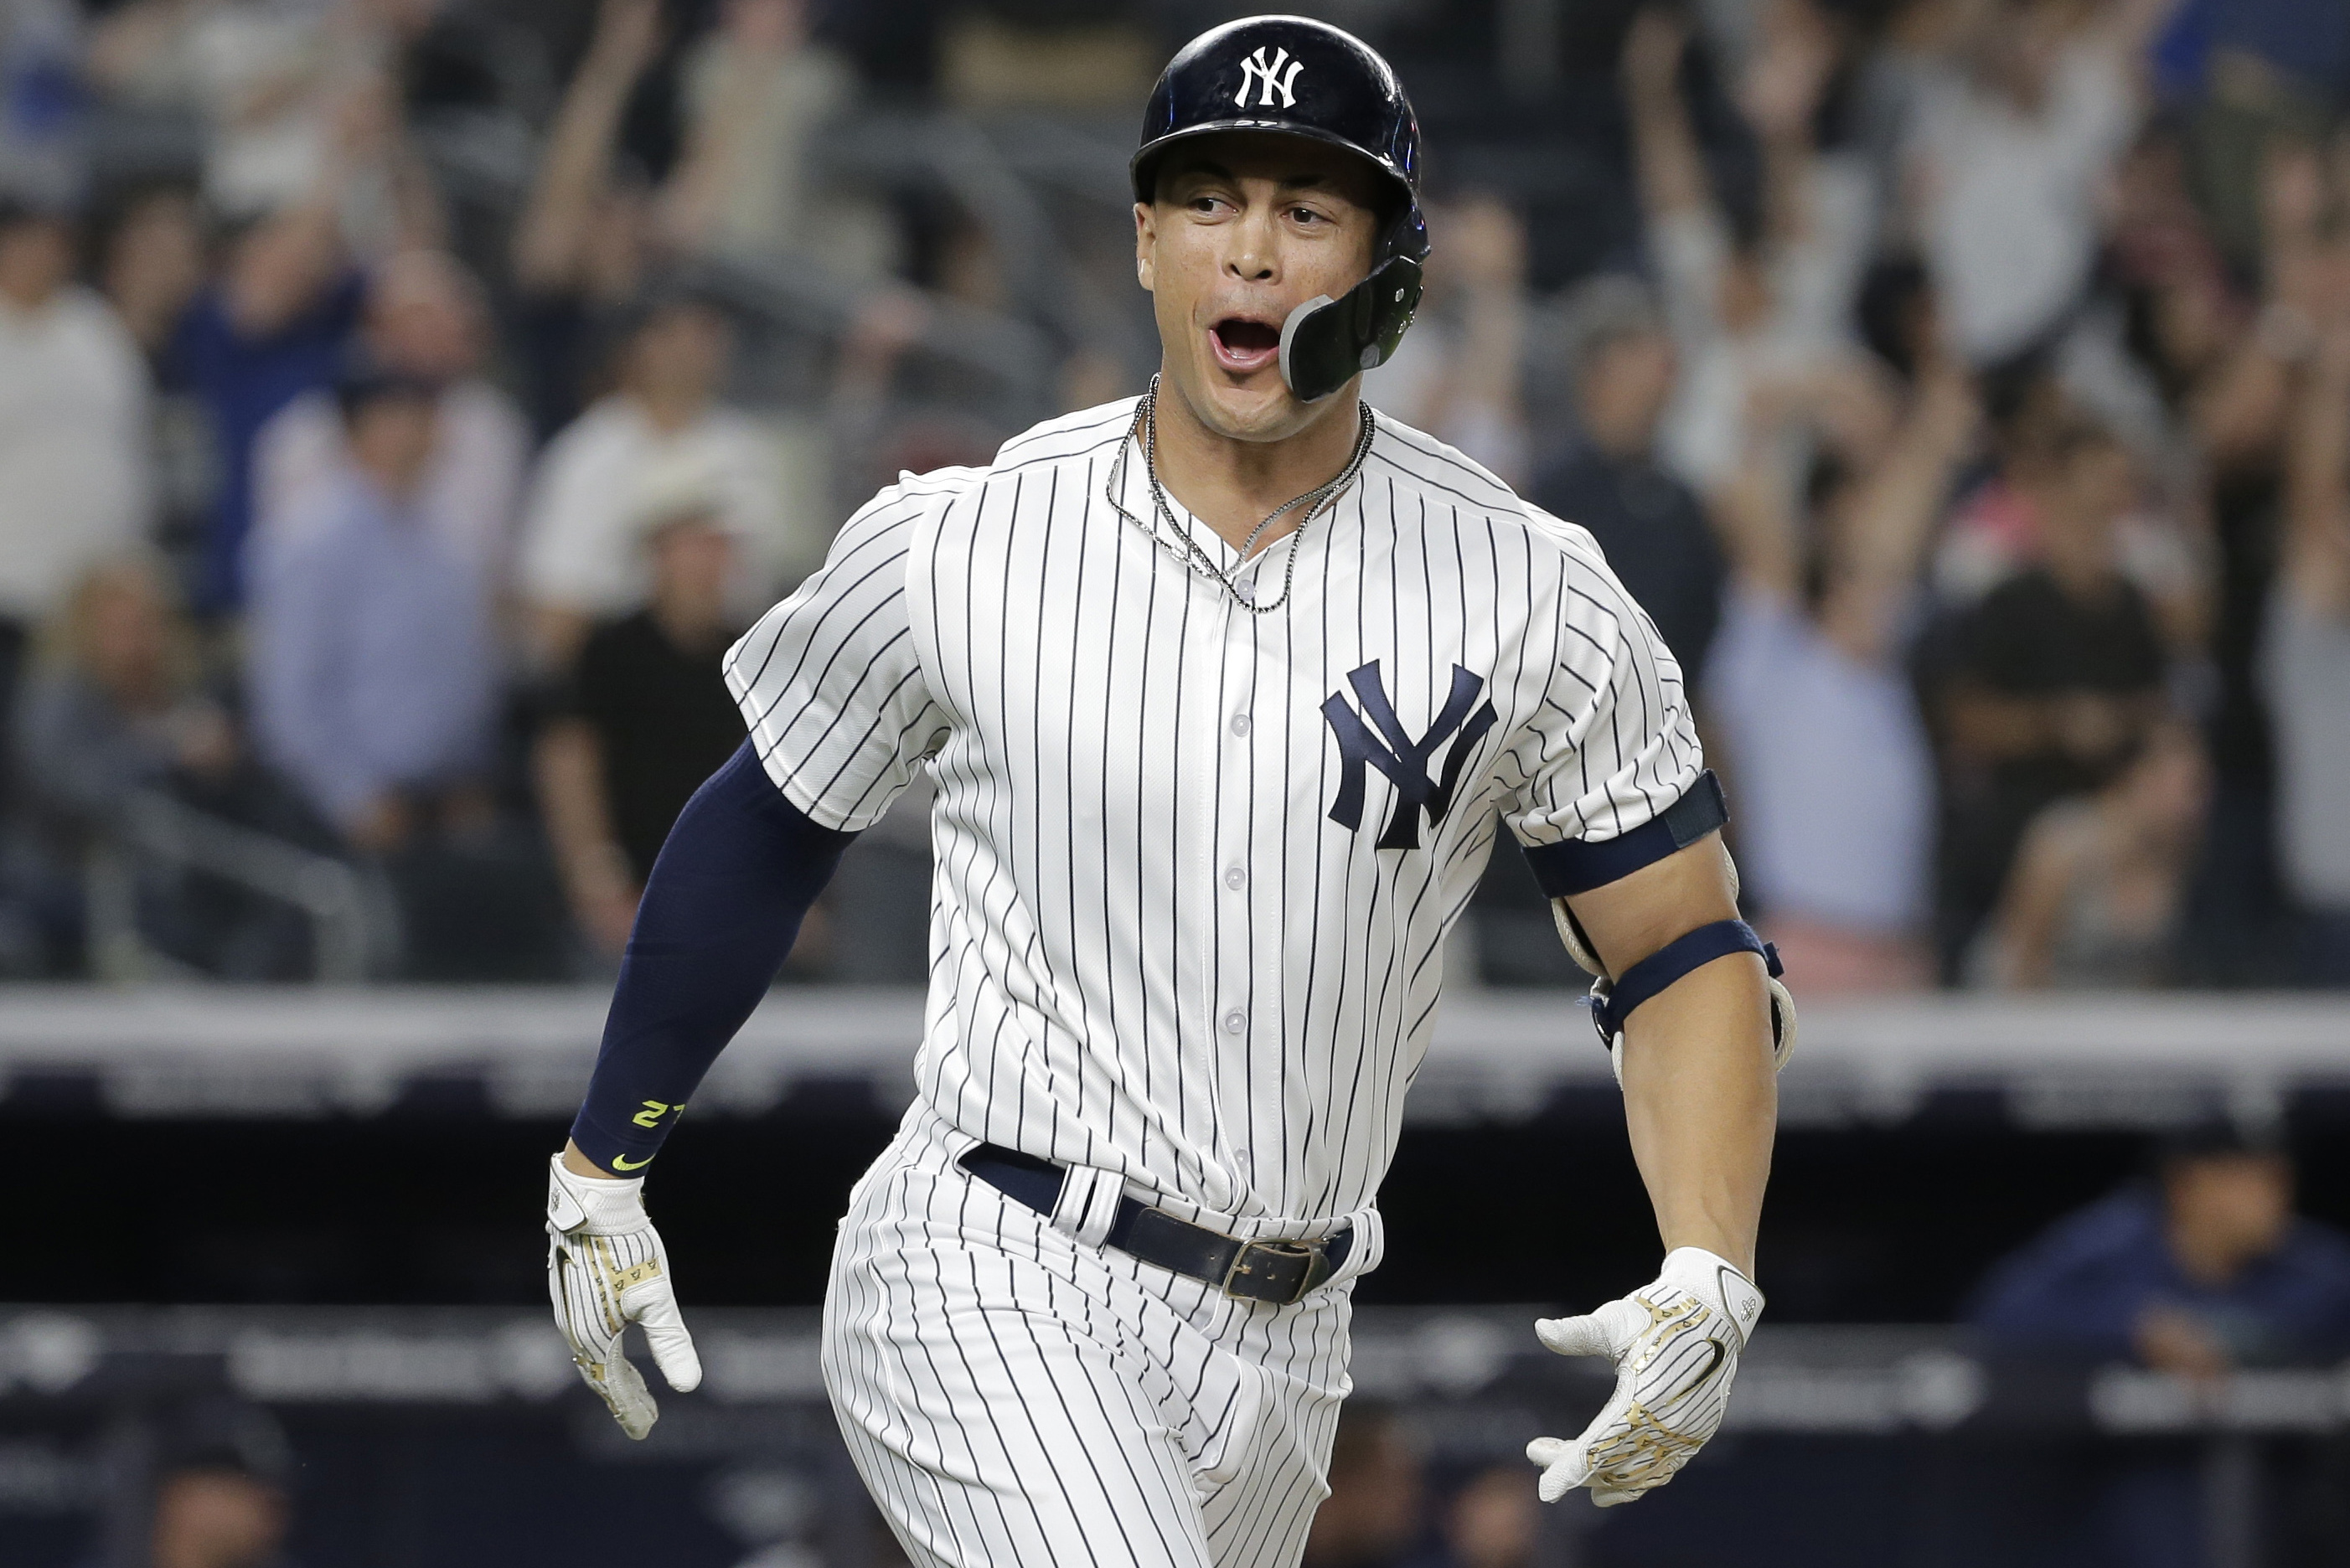 Giancarlo Stanton on Walk-Off HR vs. Mariners: 'That's What You